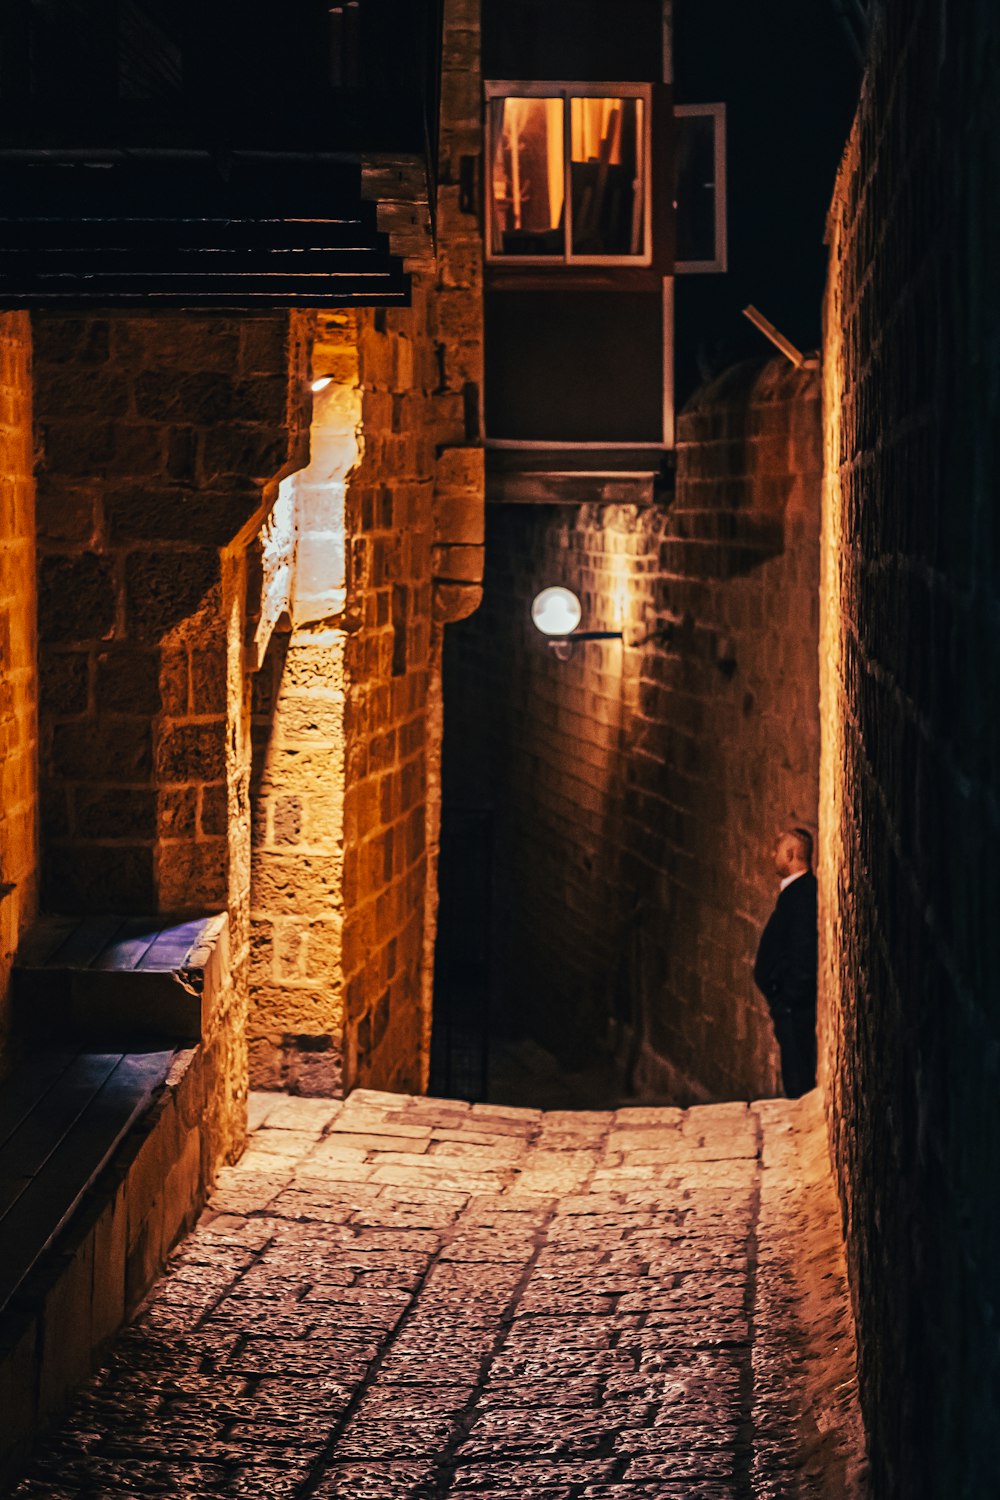 a person standing in an alley way at night